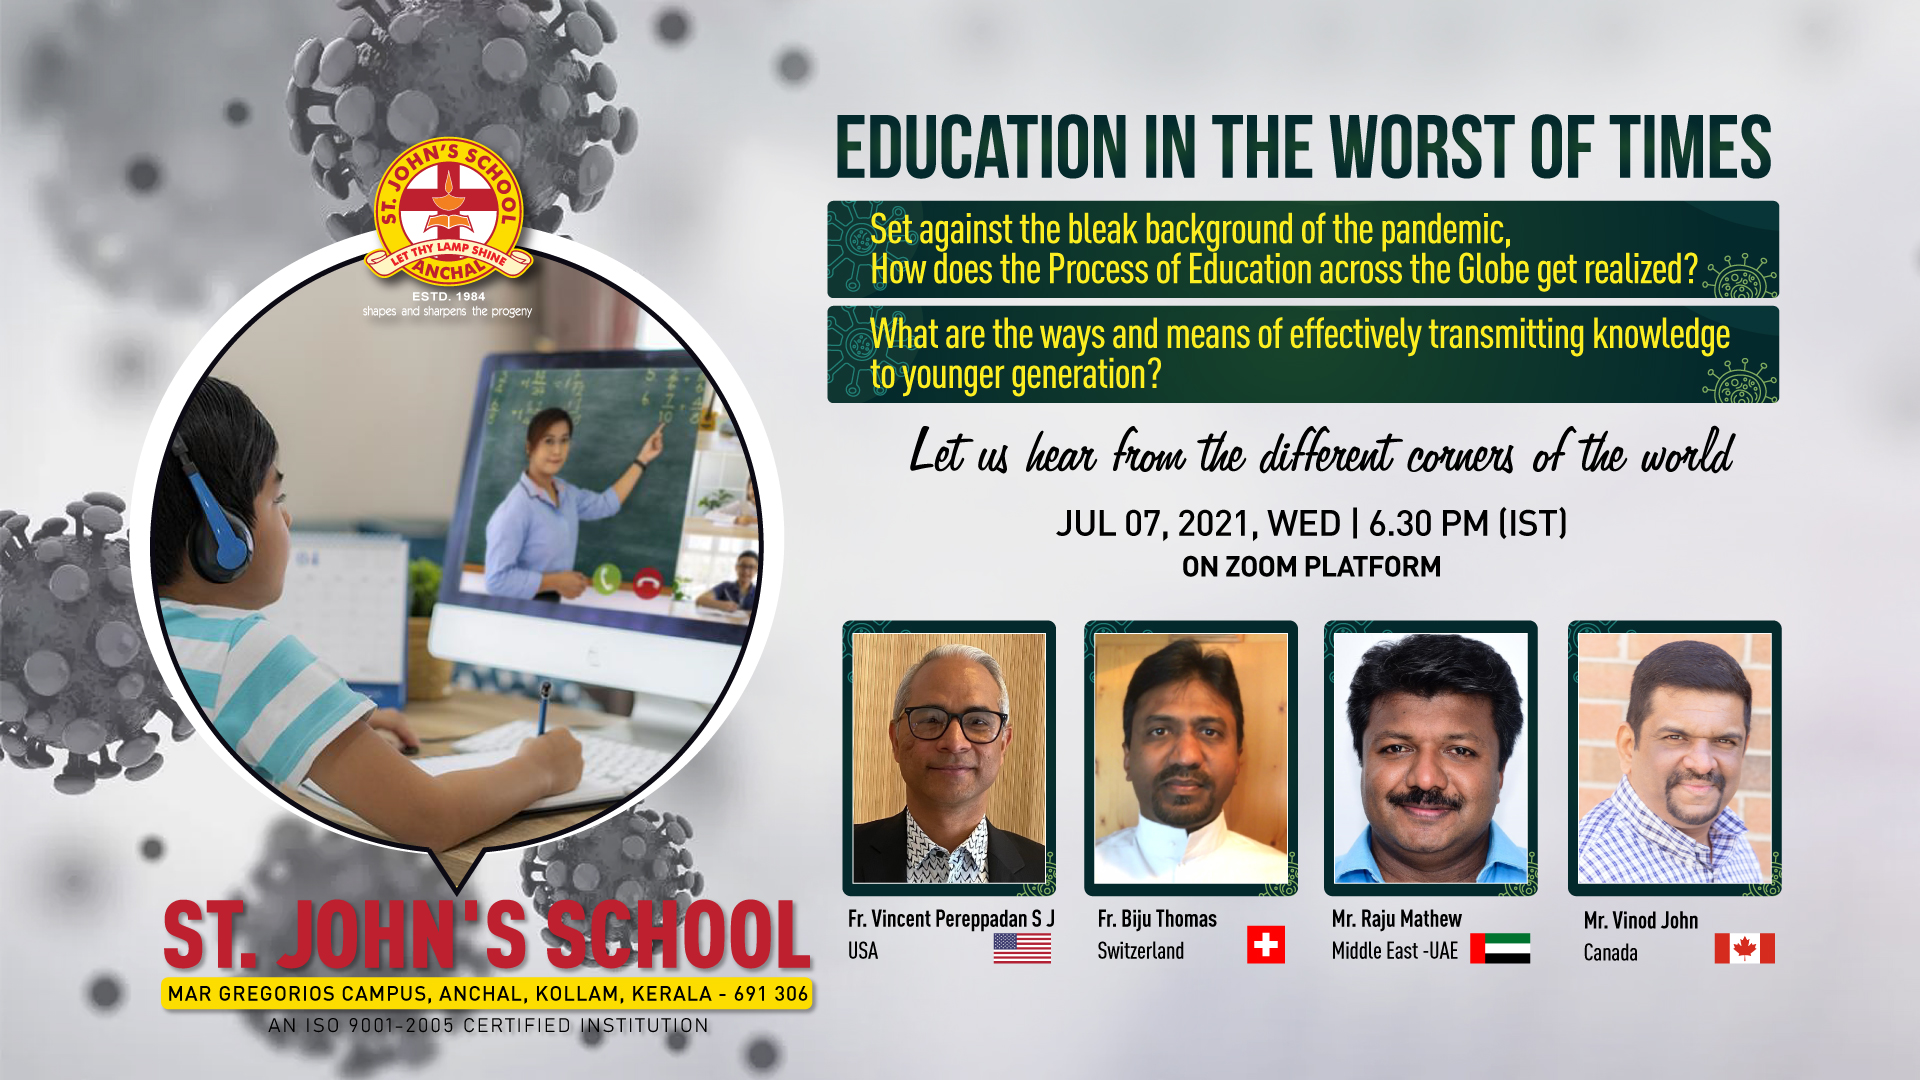 Education in the worst of times – Let us hear from the different corners of the world